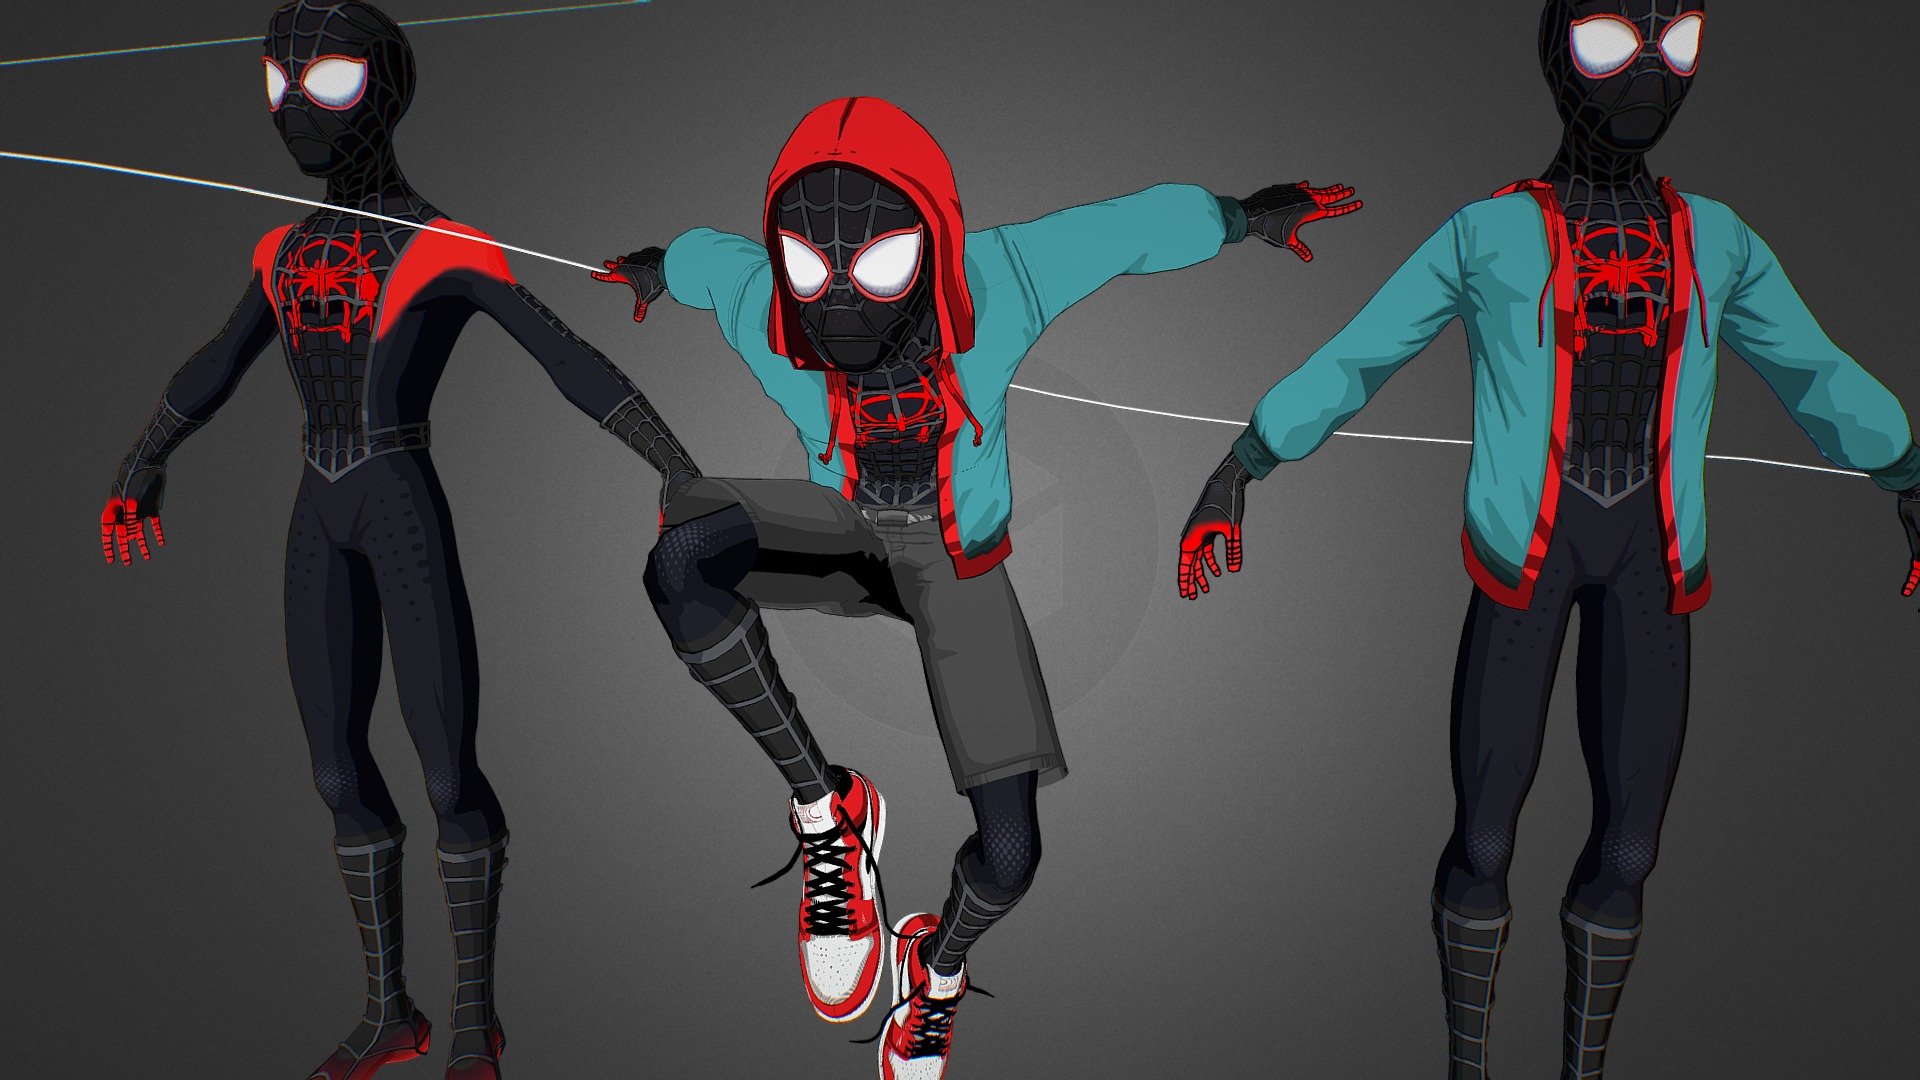 Miles Morales From Spiderman: into the spider verse in my style
face and body rigged
Rigged  in blender using Rigify addon, compatible with blender 3.0, 2.90, 2.80, etc.
Works on Eevee and Cycles.


Rigged
Handpainted
3 types of jacket
Eevee
Cycles

the blend files is in the additional file - Spider-Man Miles Morales (Full Rigged) - Buy Royalty Free 3D model by Rodrigo Gomes (@rodzombi) 3d model